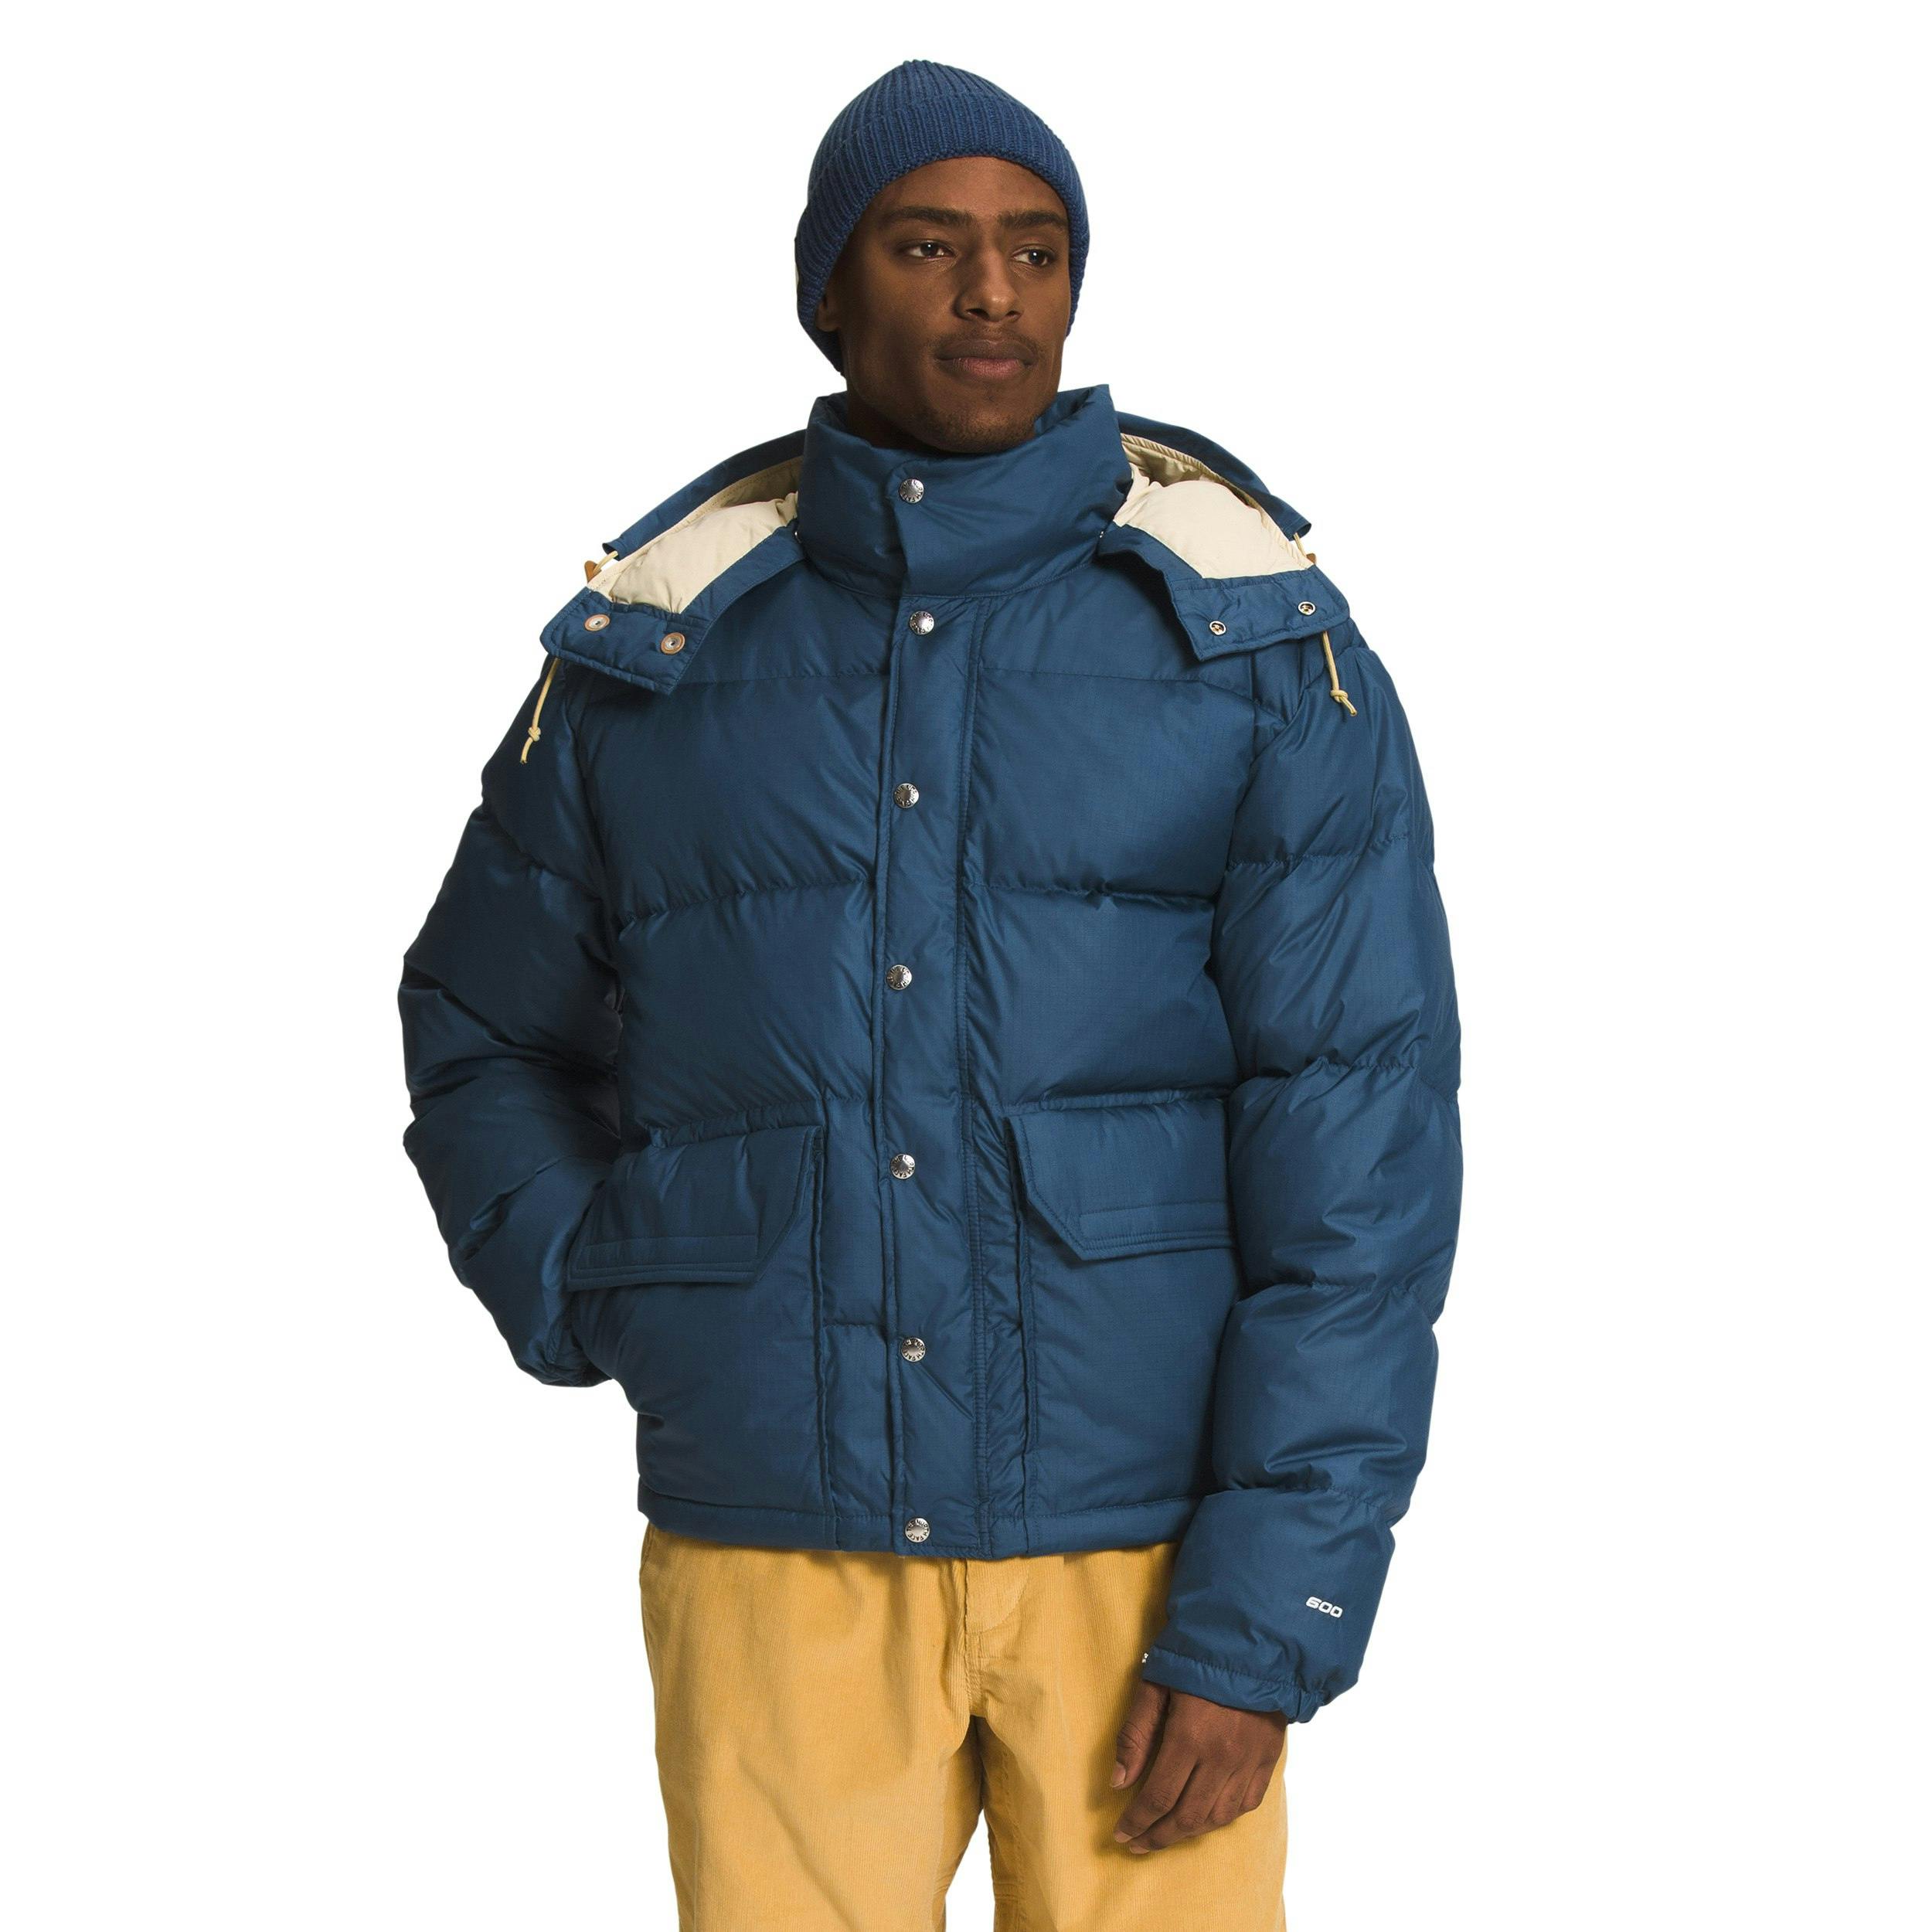 Puffer Jackets at , The North Face, and More Are Up to 71% Off